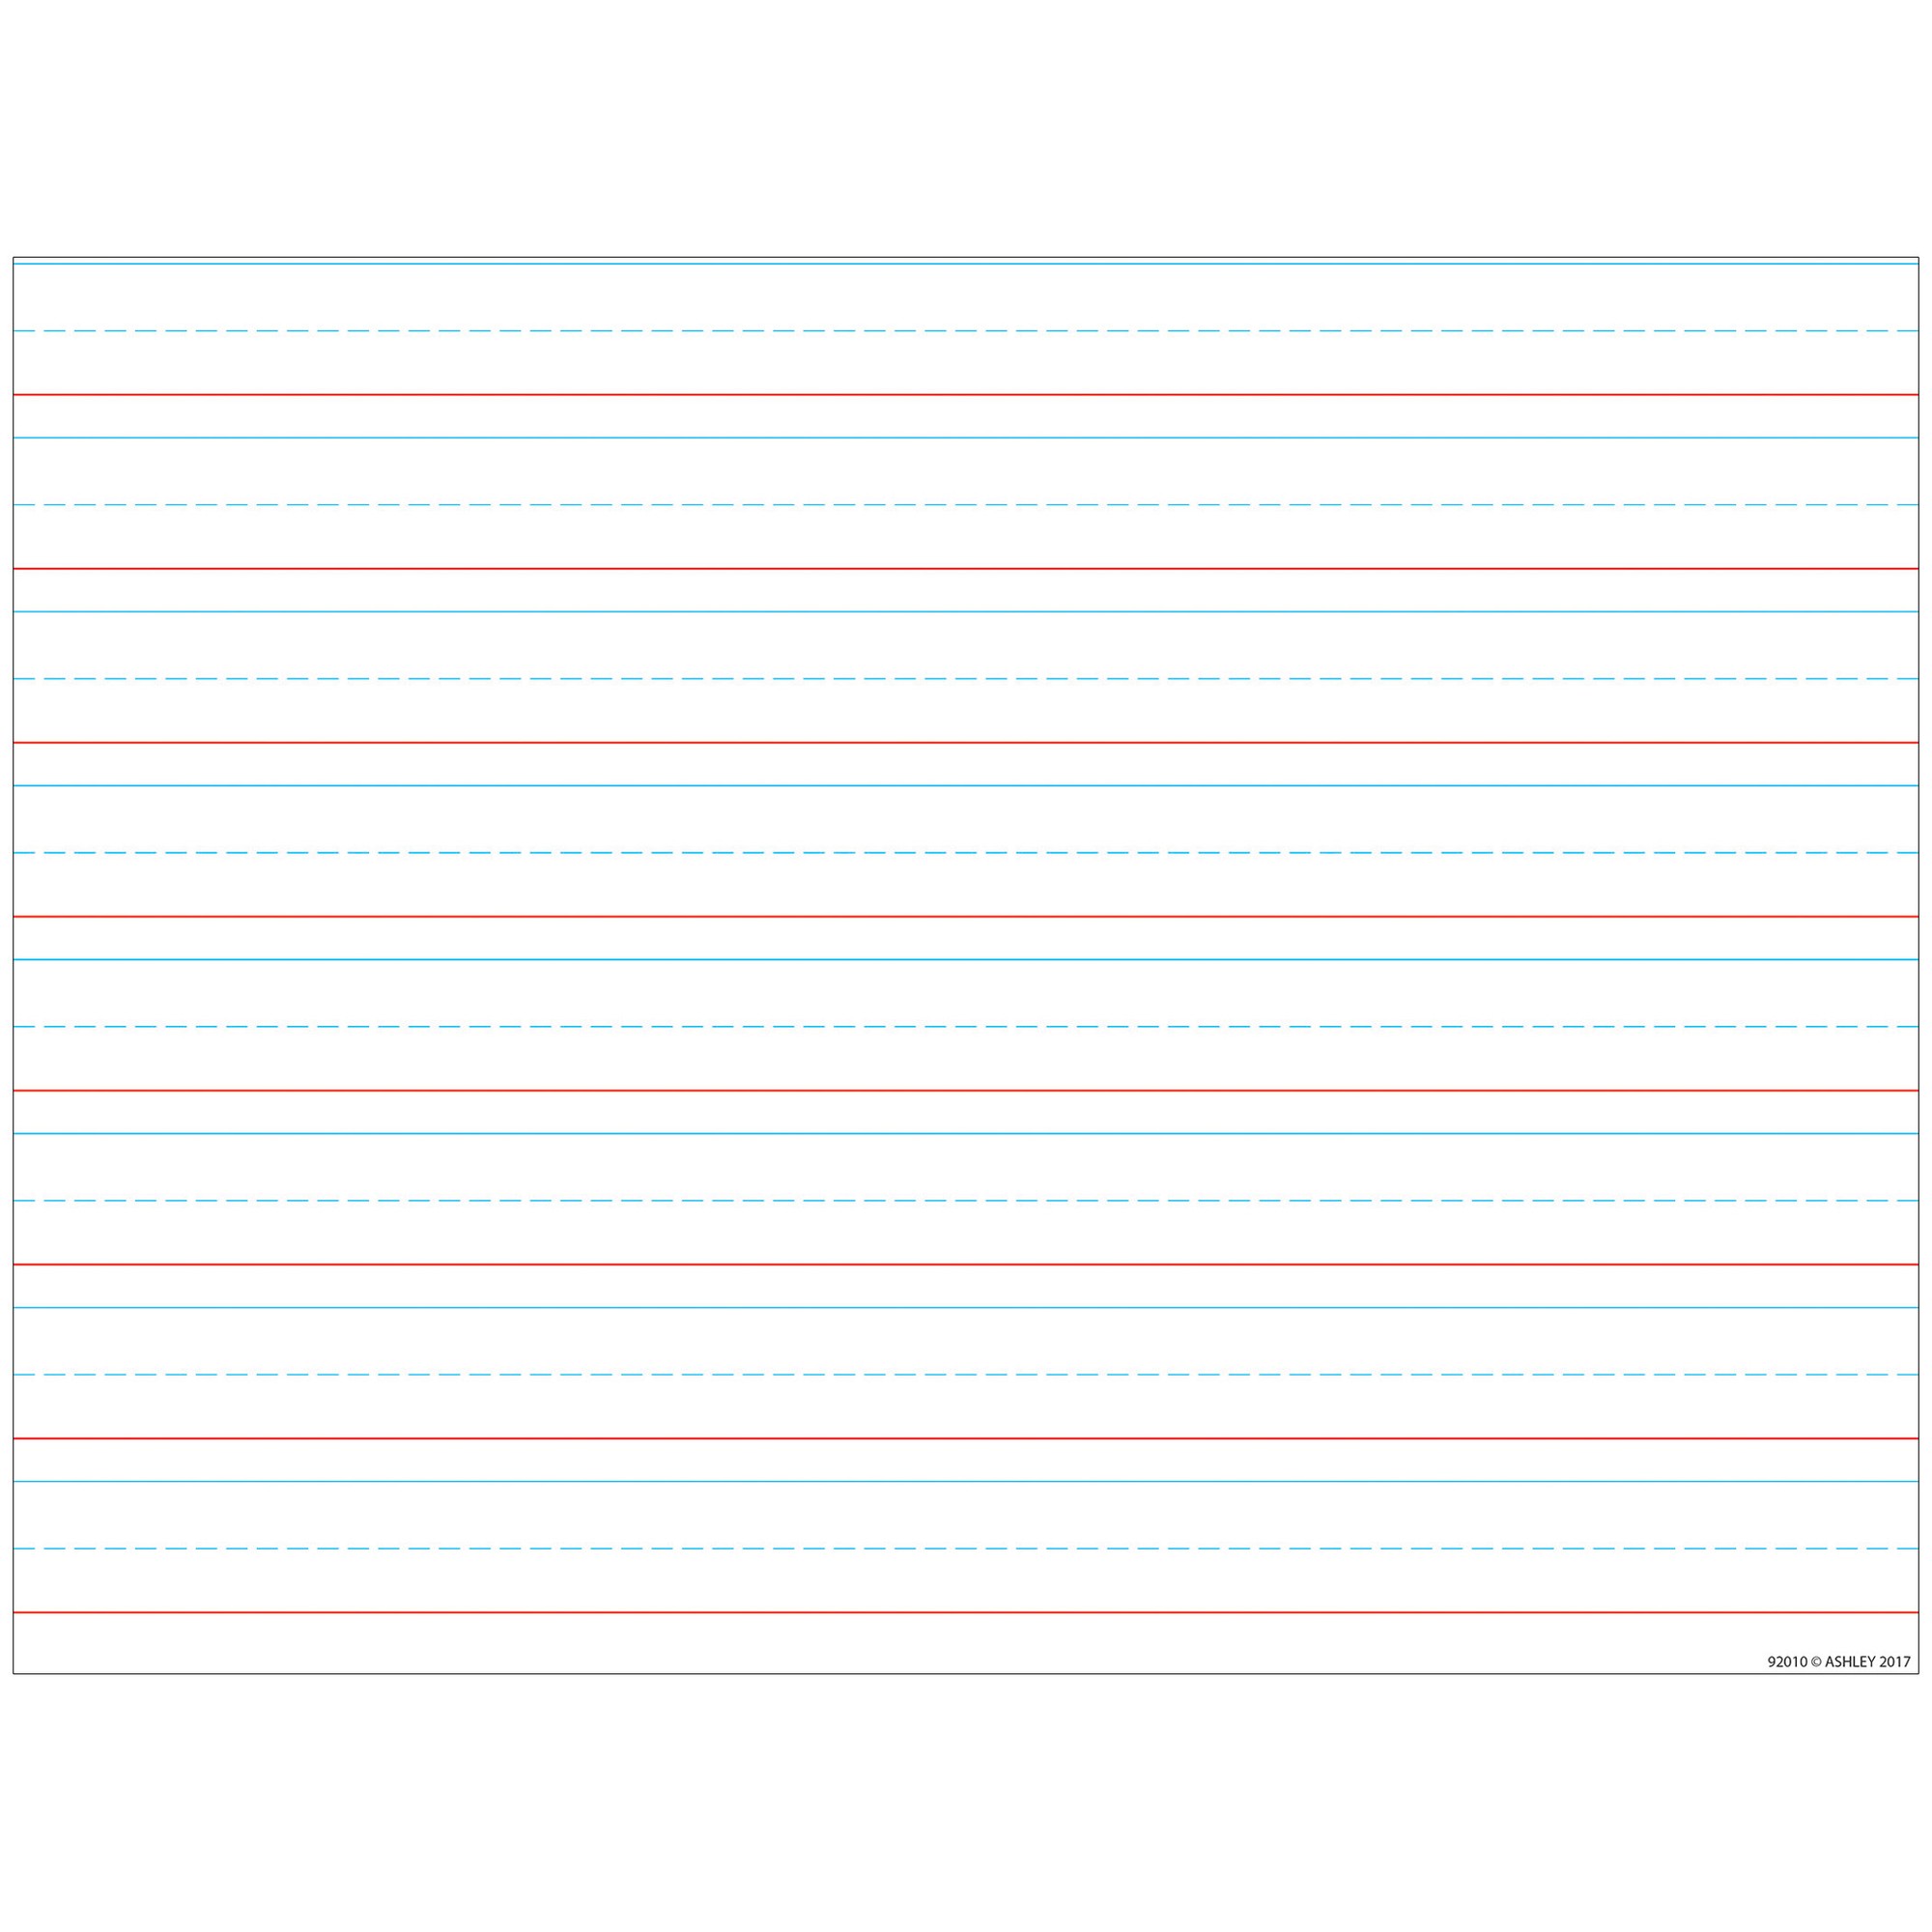 Smart Poly Handwriting Chart Tablet Lined 3/4", Dry-Erase Surface, 17" x 22"